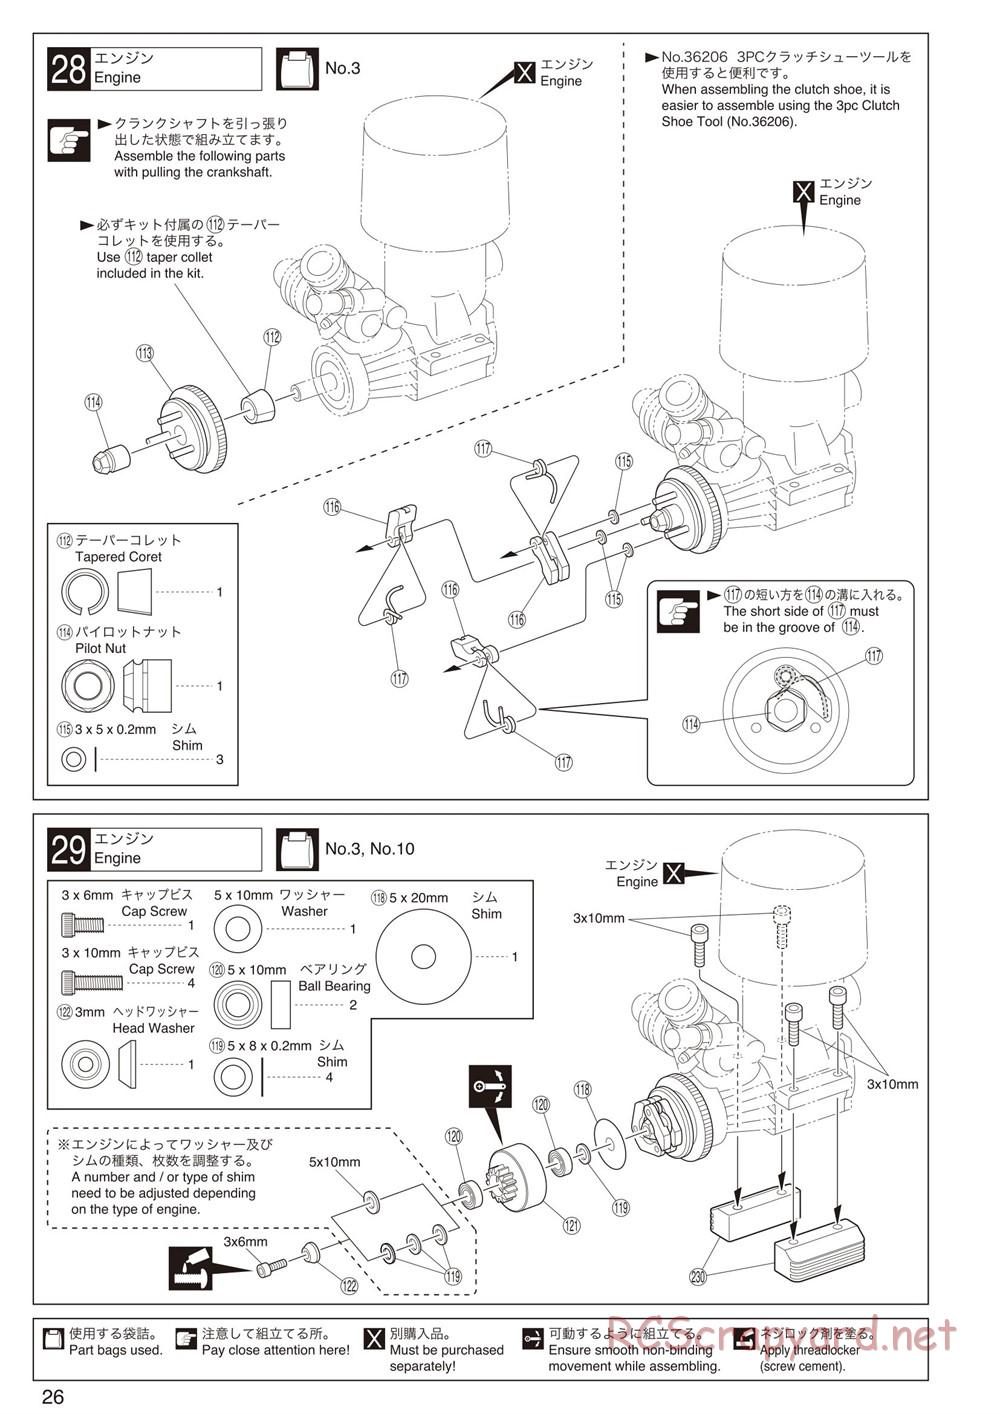 Kyosho - Inferno ST-RR Evo.2 - Manual - Page 30